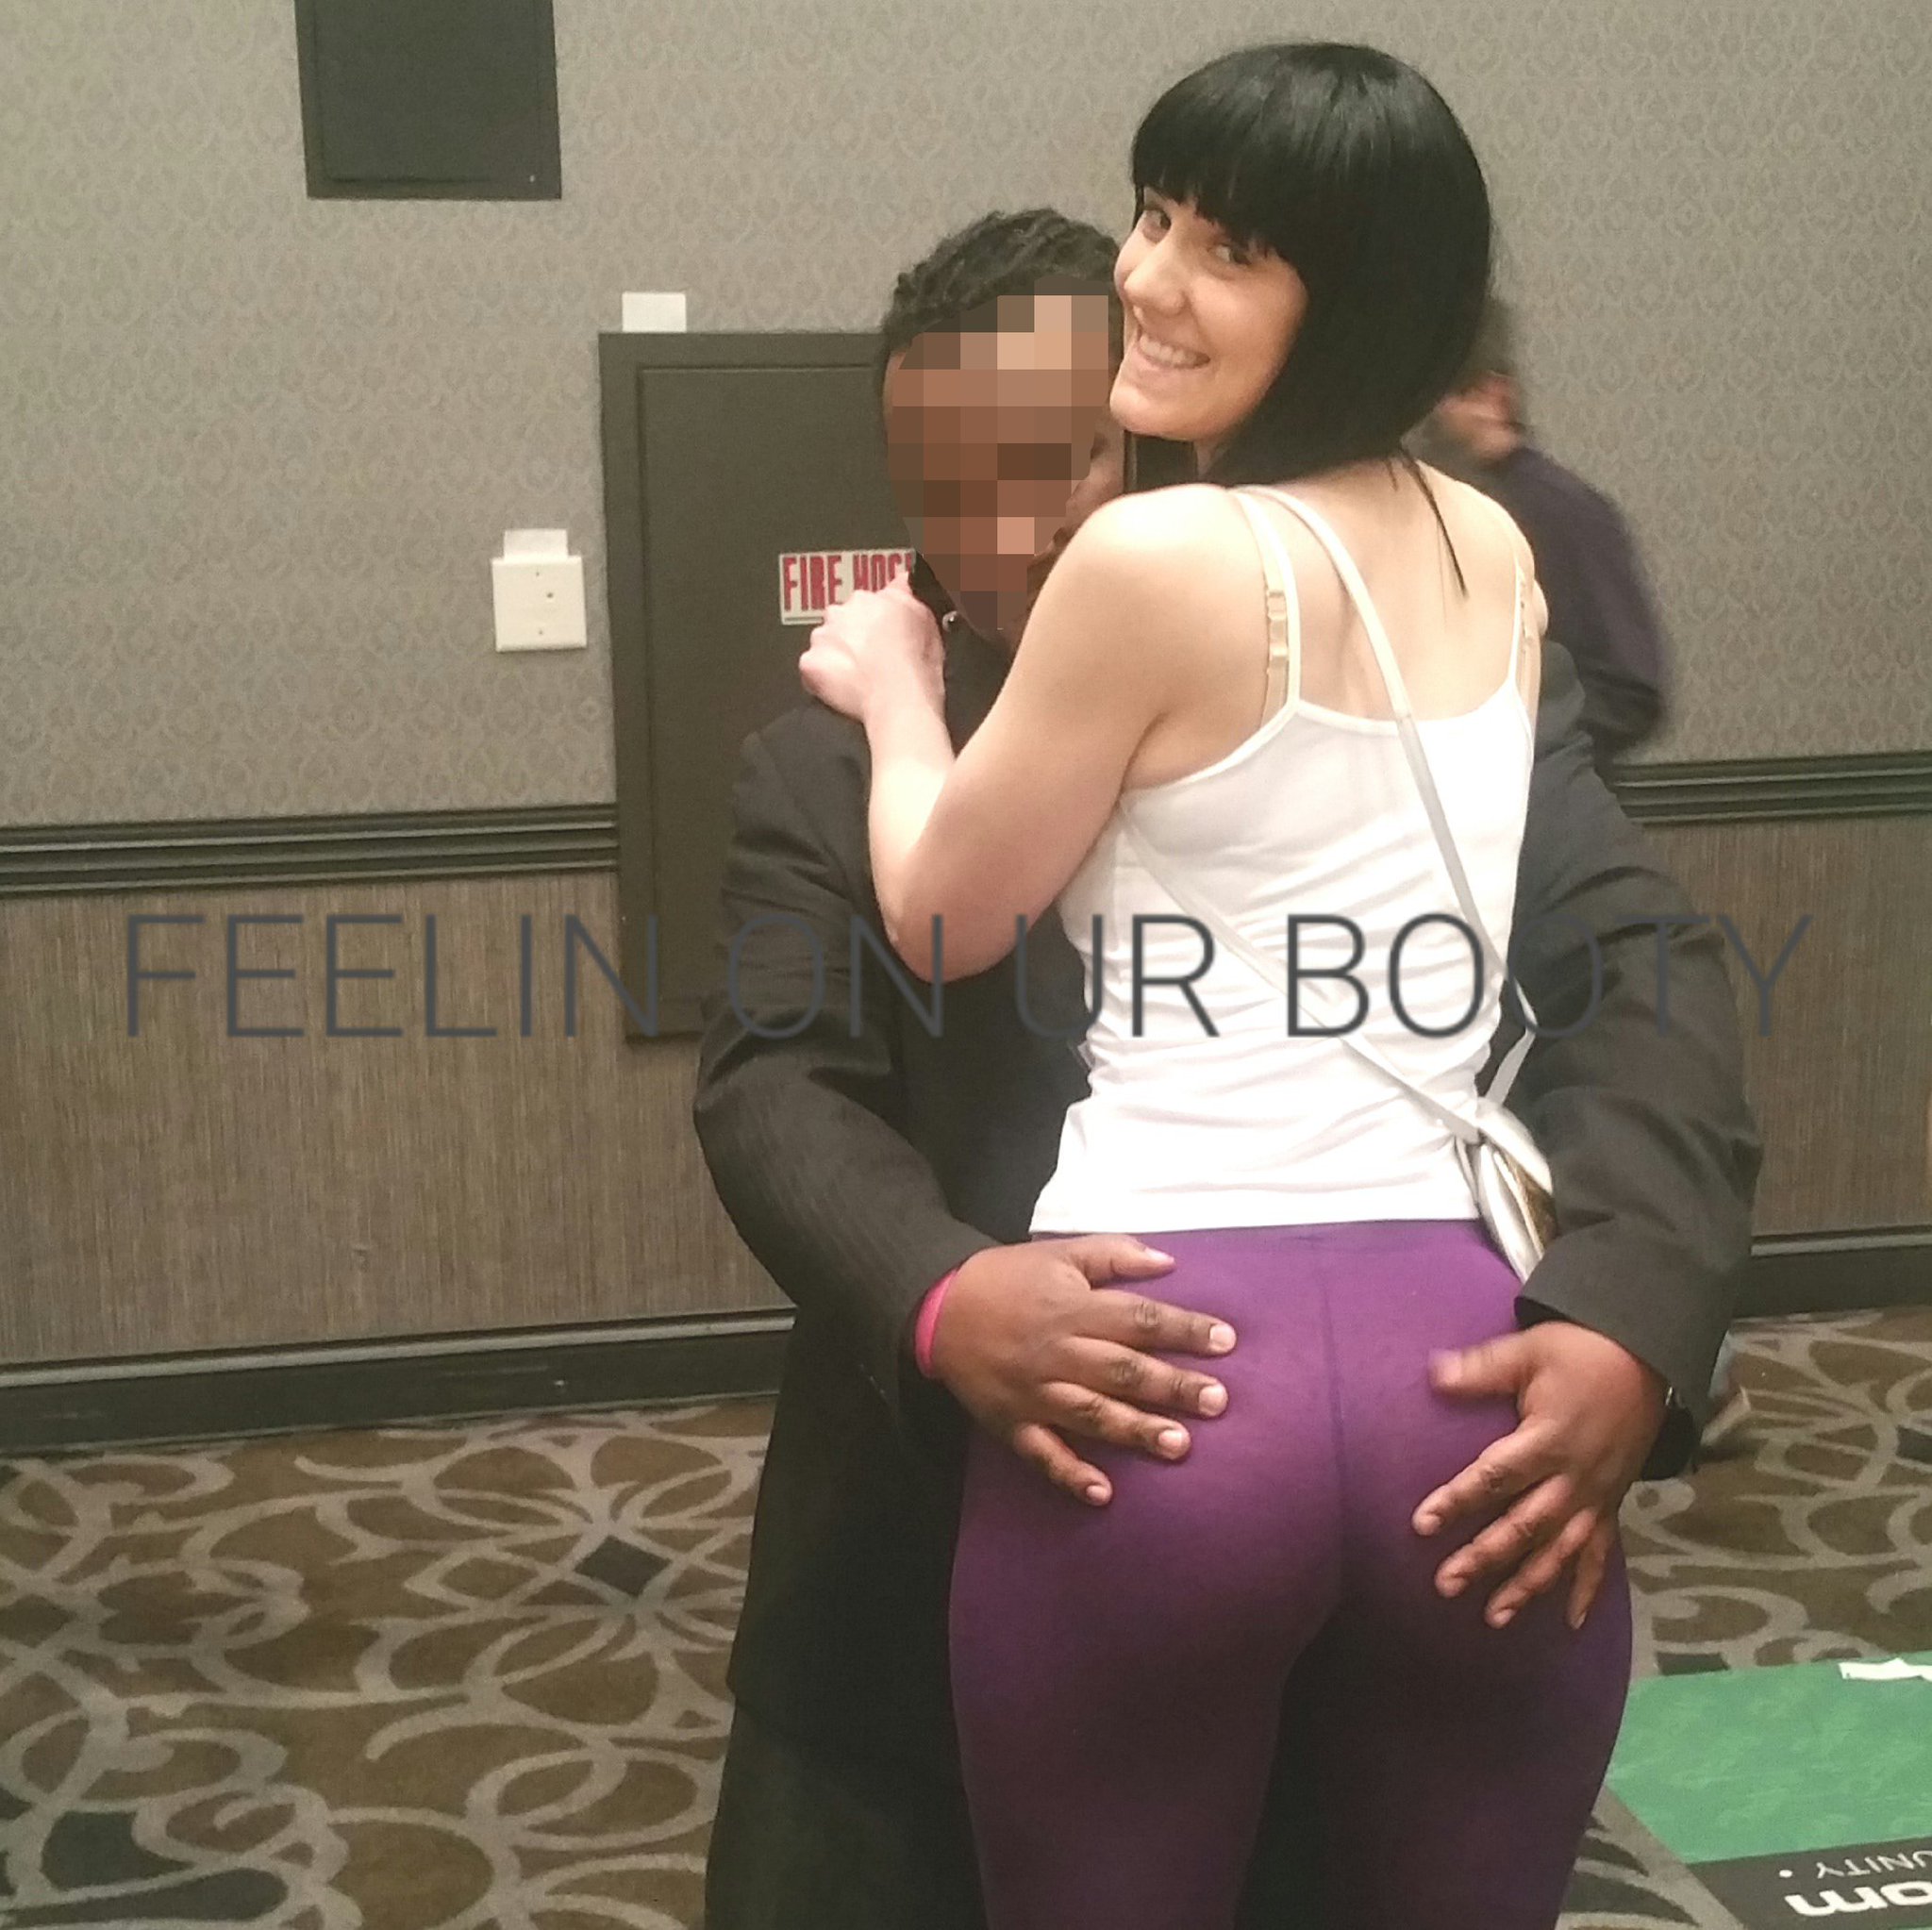 1 pic. More AVN and Las Vegas Flash backs! I loved these #BBW soon much :-) and this guy loved copping